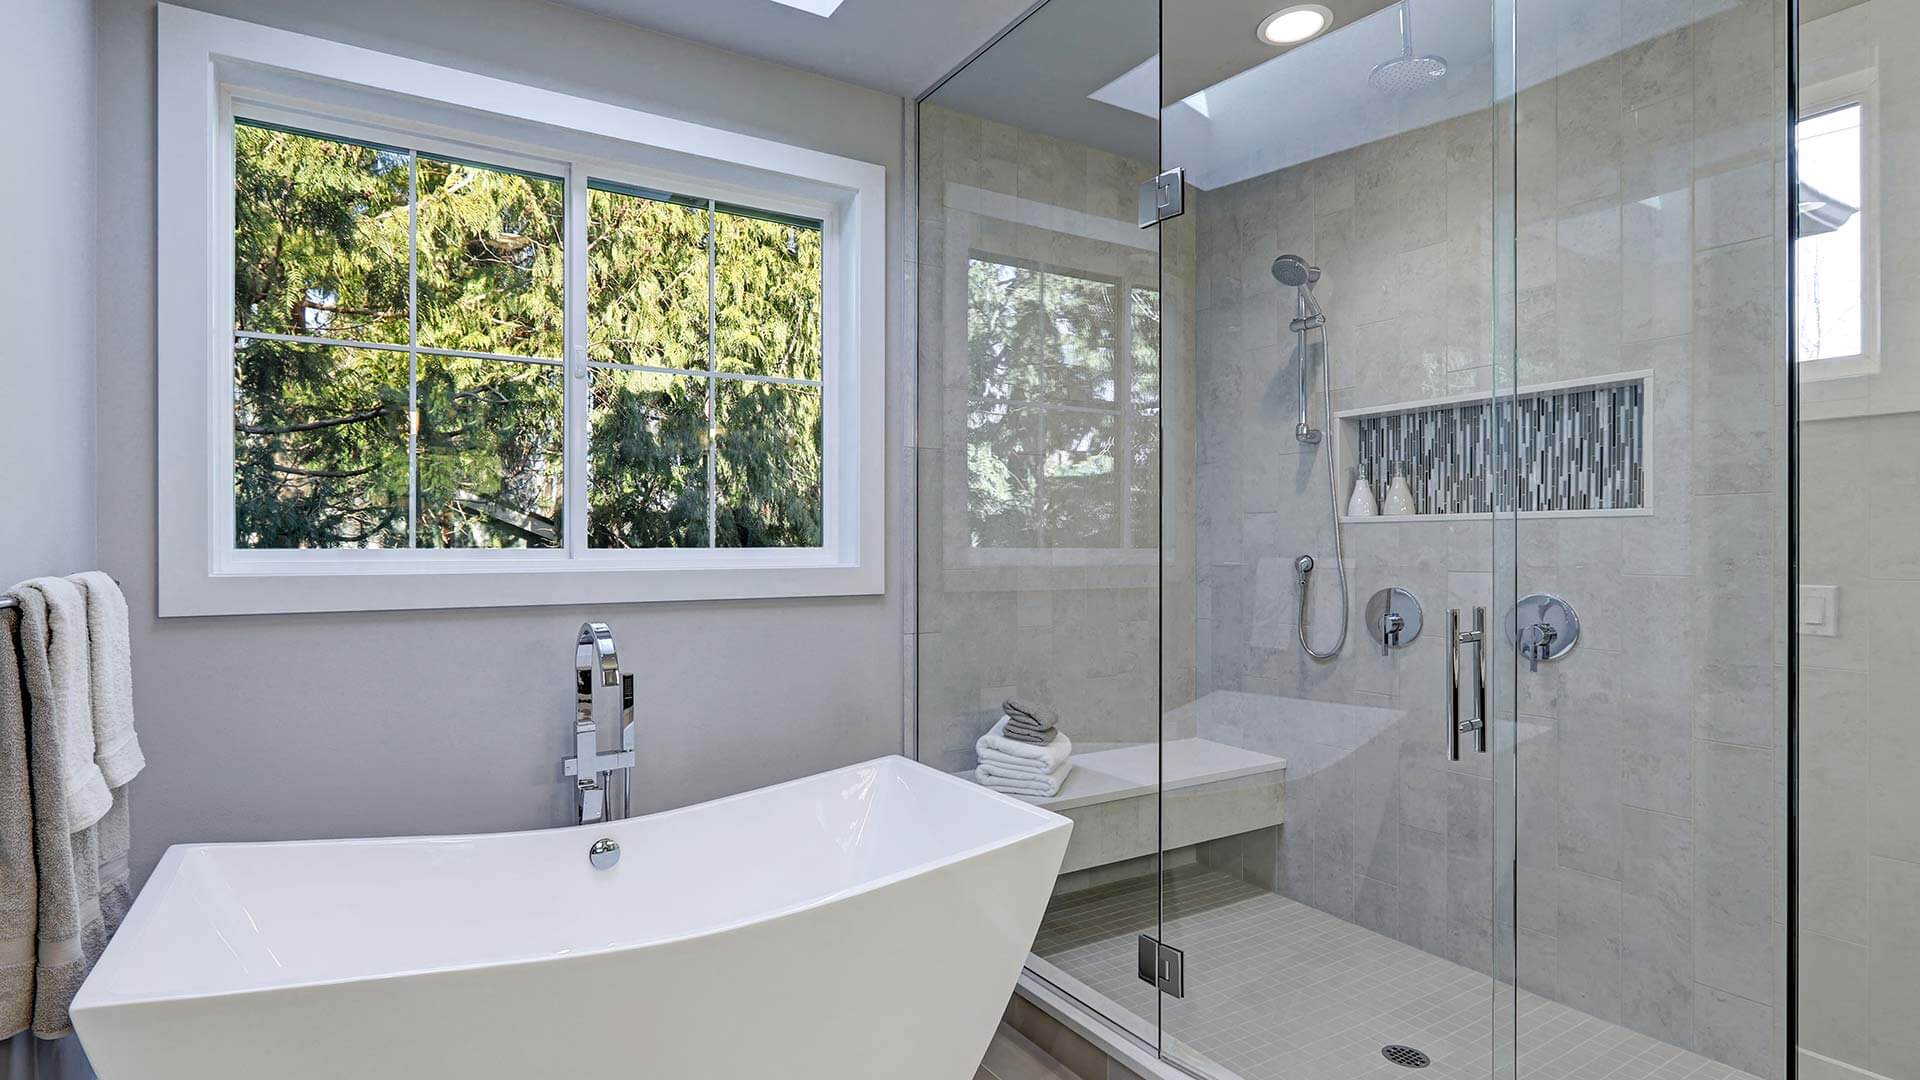 Modern renovated bathroom with a Classic Series Double Slider Window.